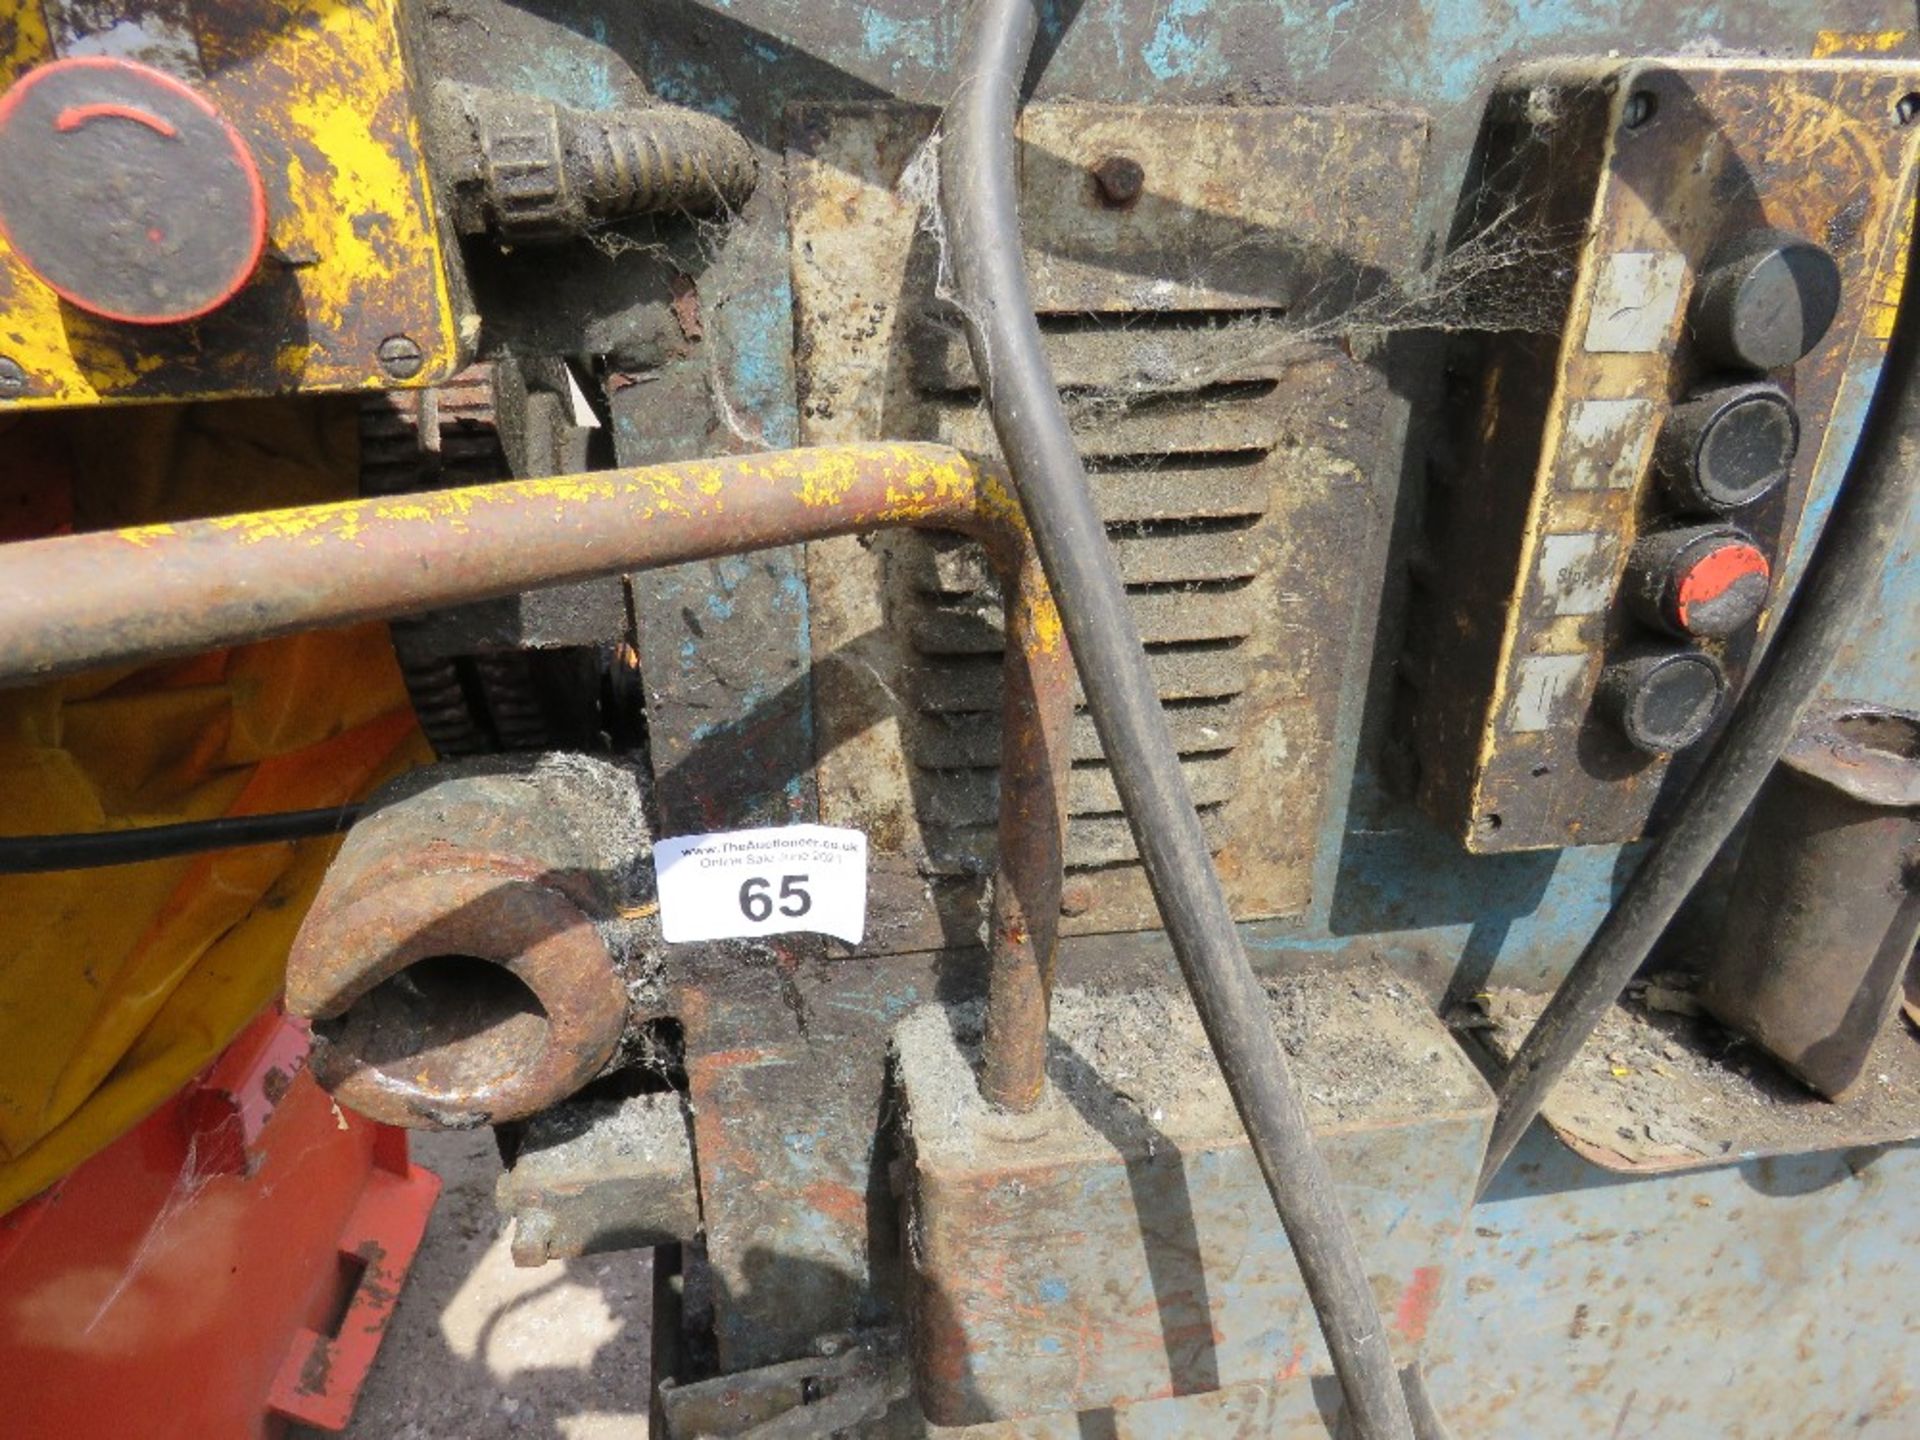 ELDAN M3 CABLE STRIPPER UNIT, 3 PHASE. WORKING WHEN REMOVED. NO VAT ON HAMMER PRICE. - Image 5 of 6